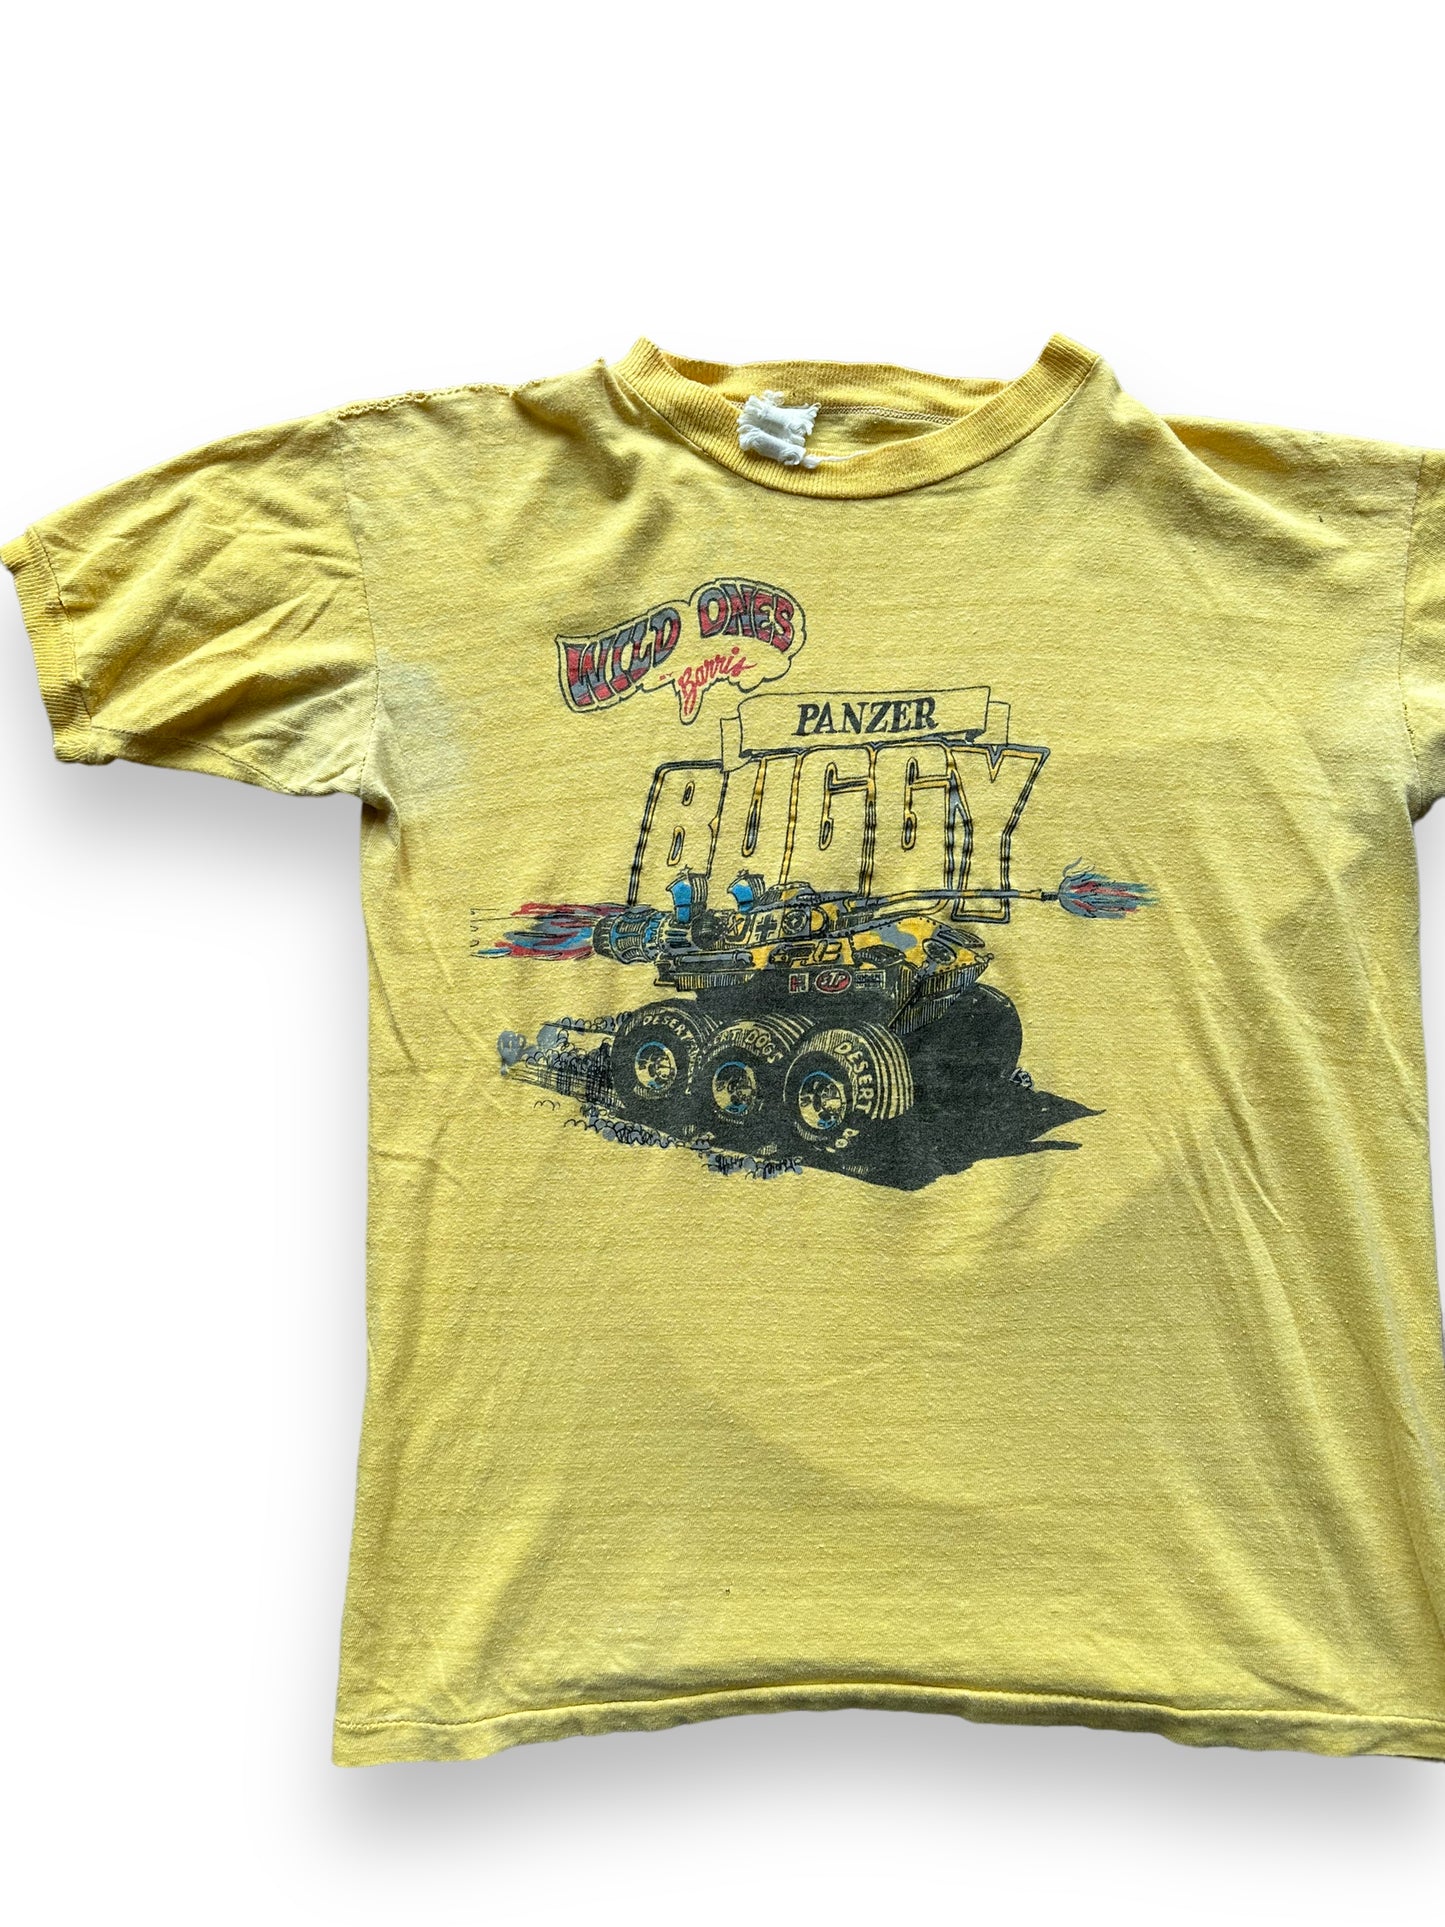 Front right of Vintage Wild Ones Panzer Buggy Tee SZ L |  Vintage Auto Tee Seattle | Barn Owl Vintage